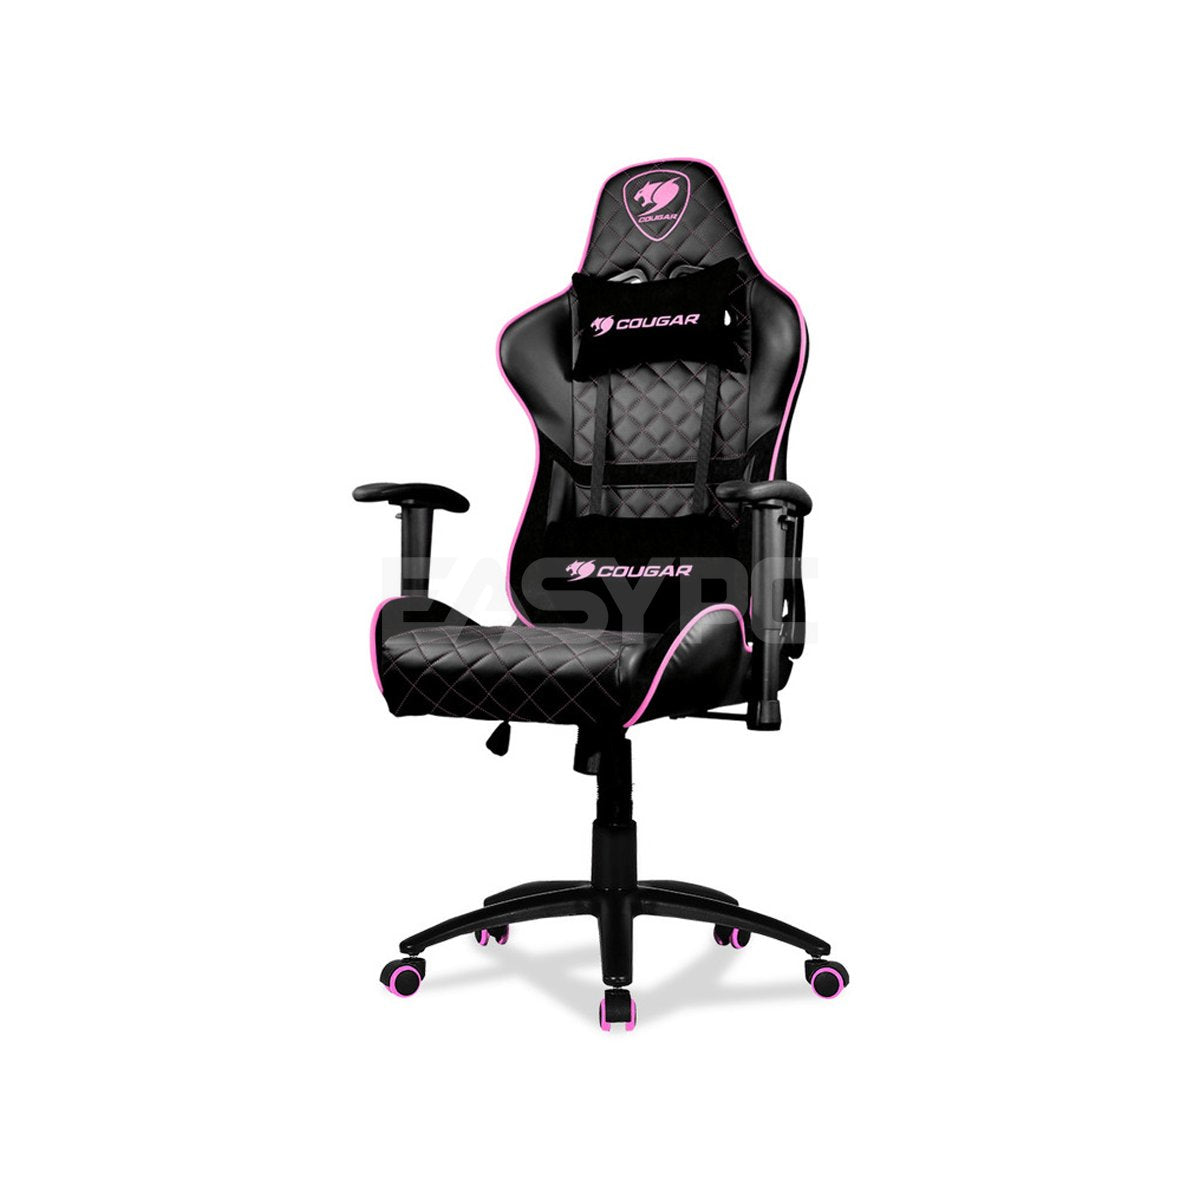 Cougar Armor One Gaming Chair Black pink-d